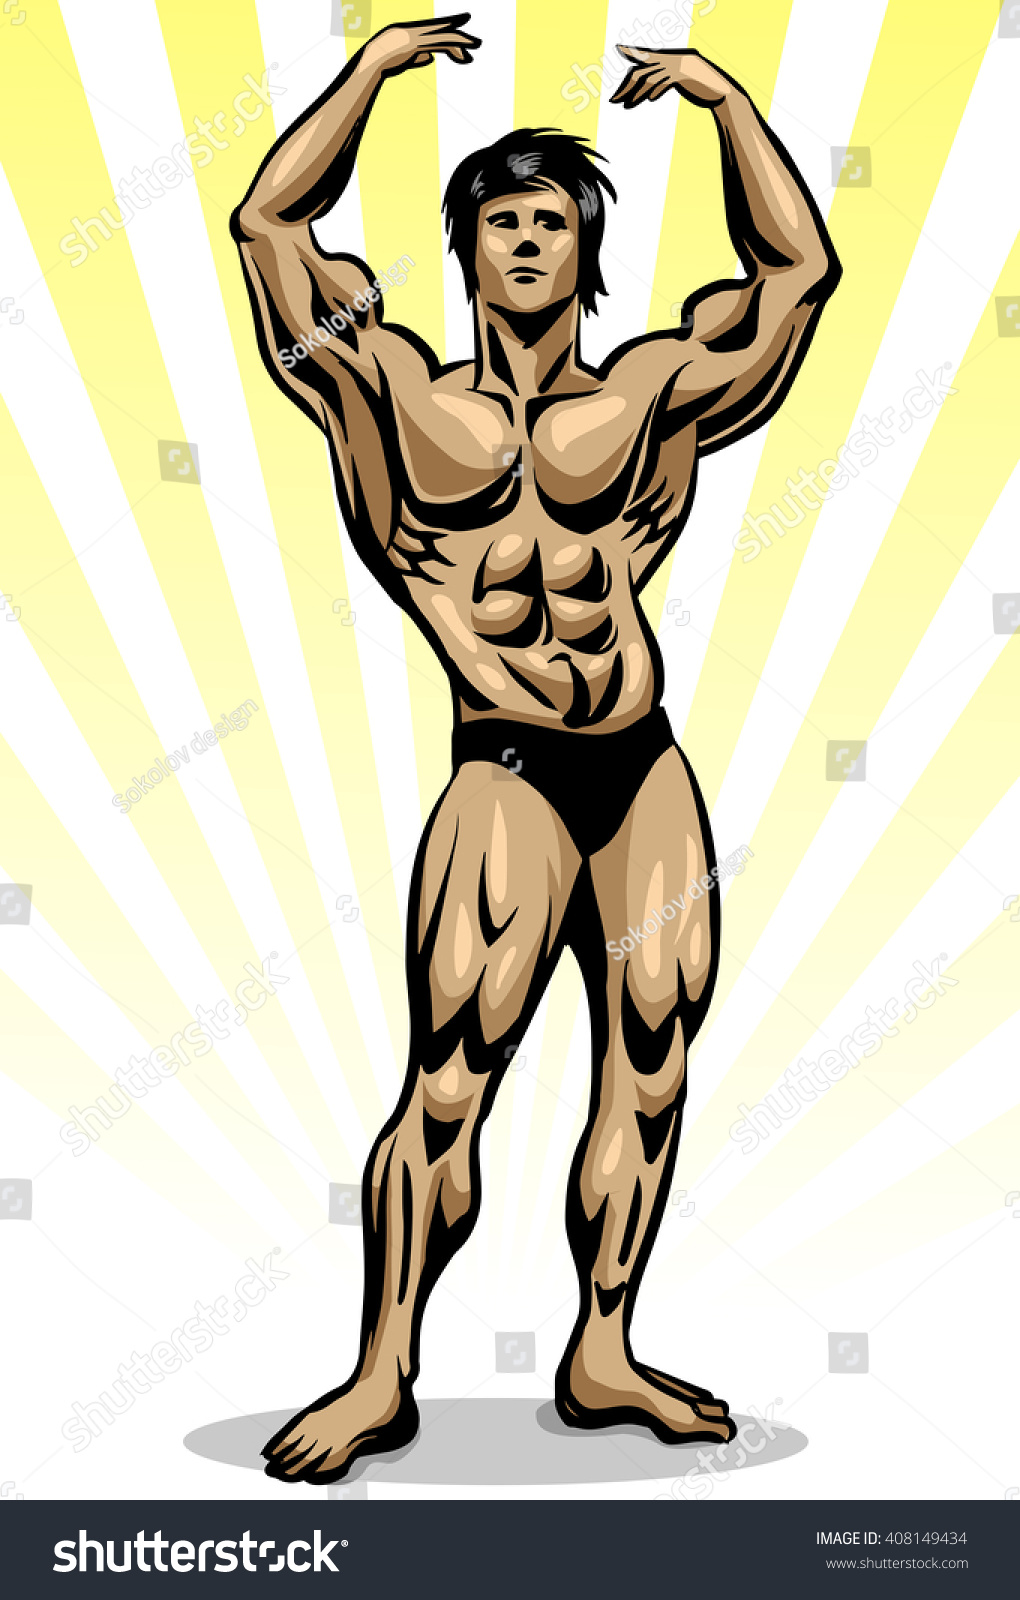 Bodybuilder Front Double Biceps Pose Aesthetic Stock Vector Royalty Free 408149434 Shutterstock 4848